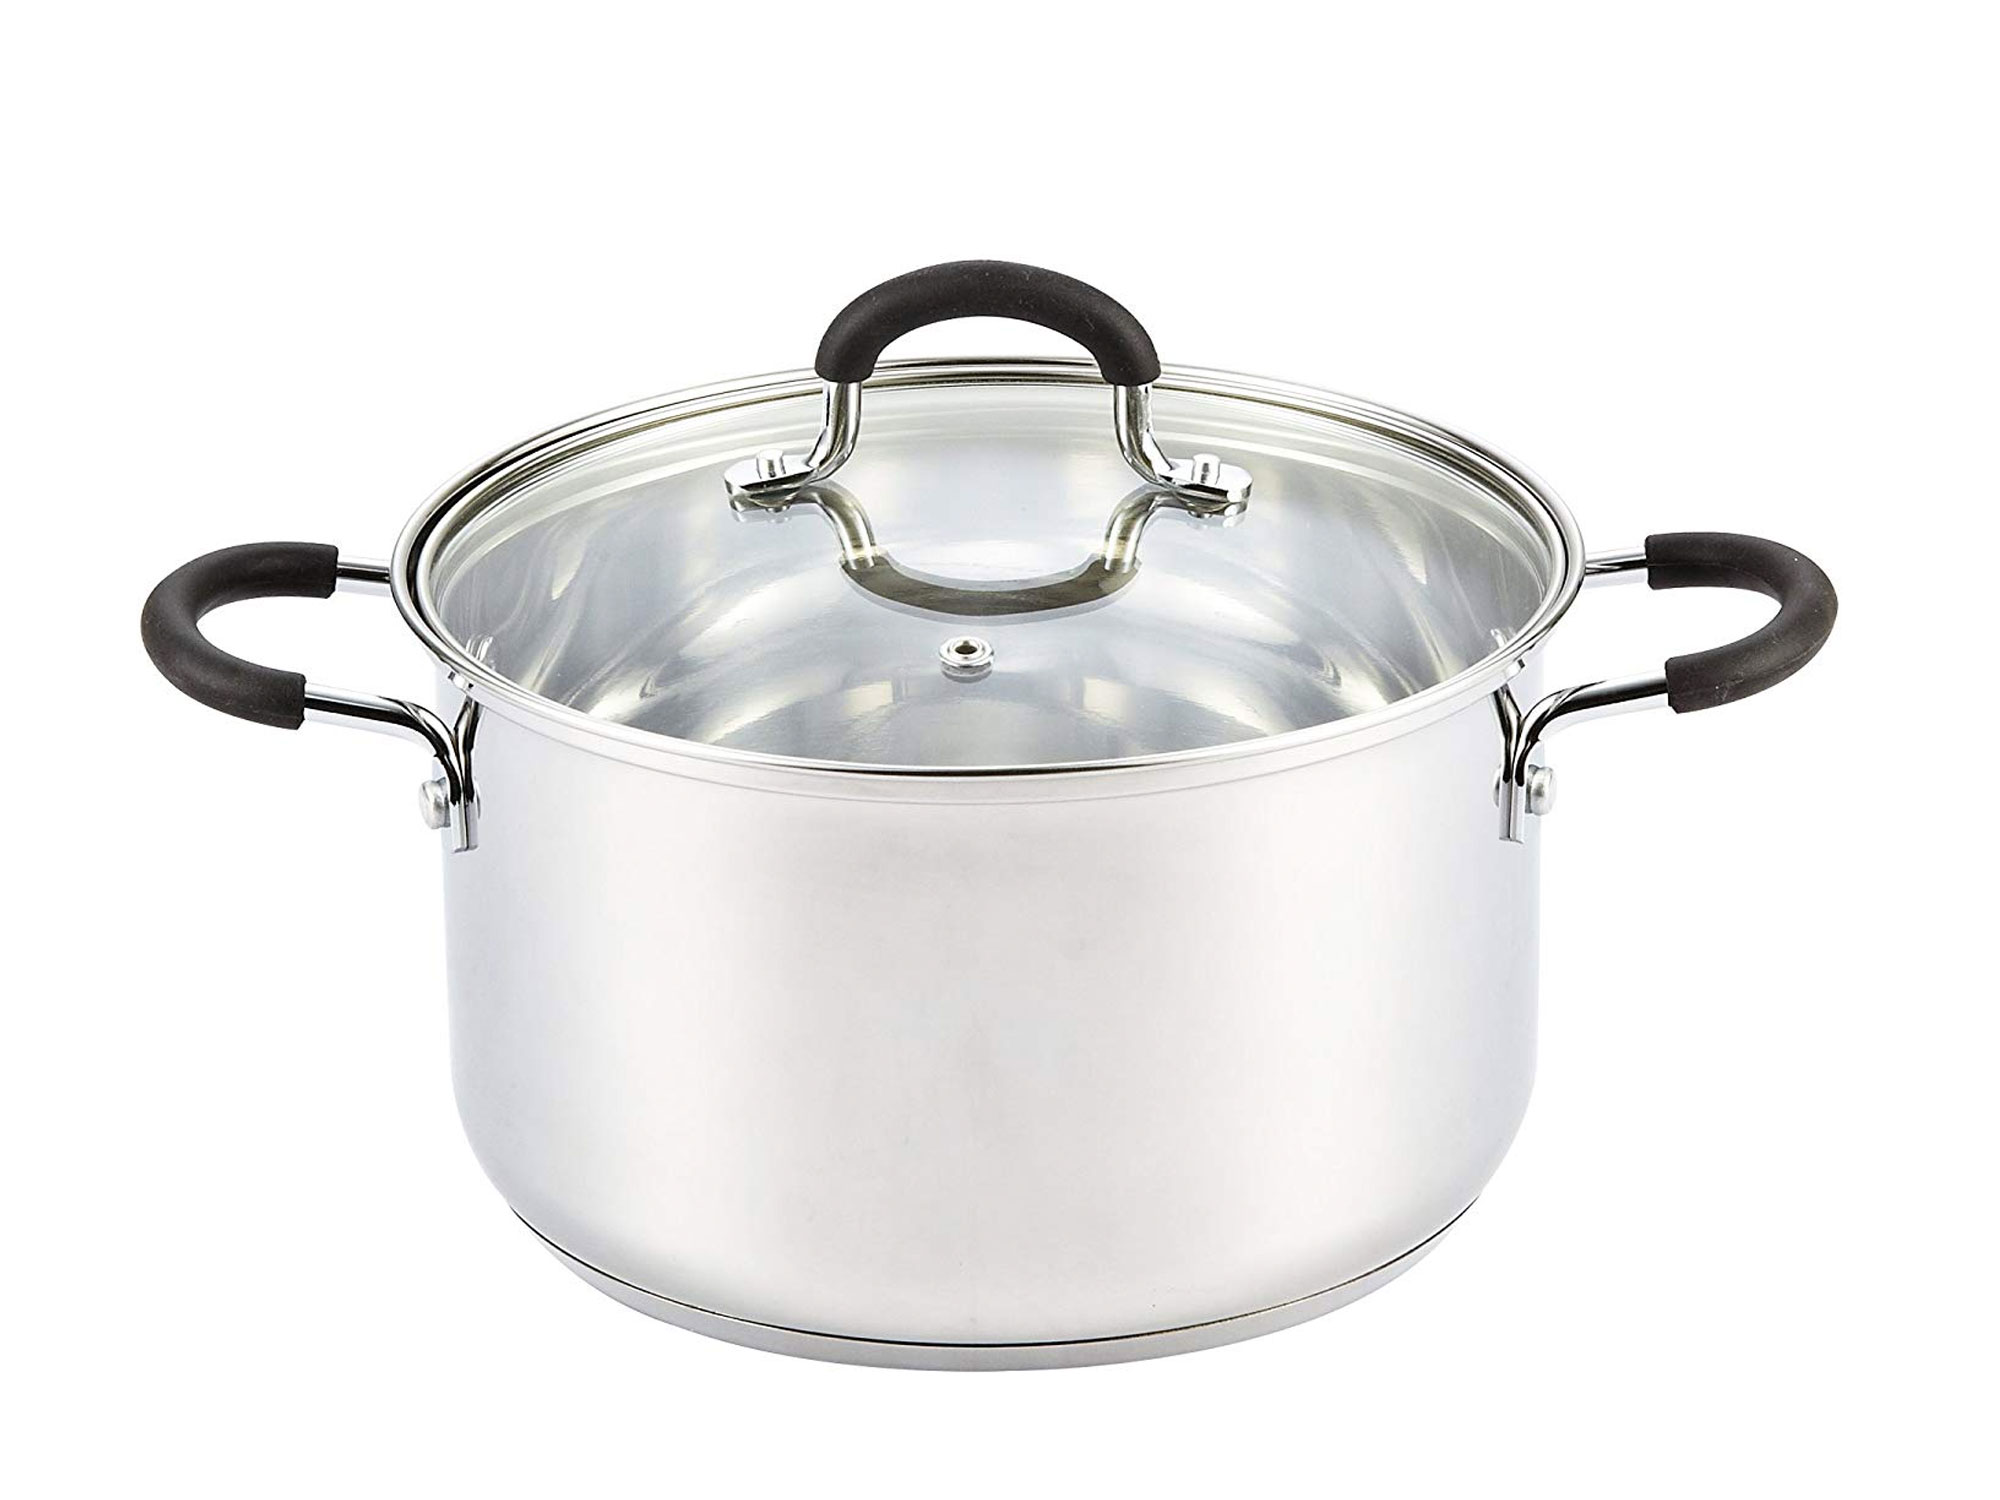 Cook N Home Stainless Steel Lid 5-Quart Stockpot